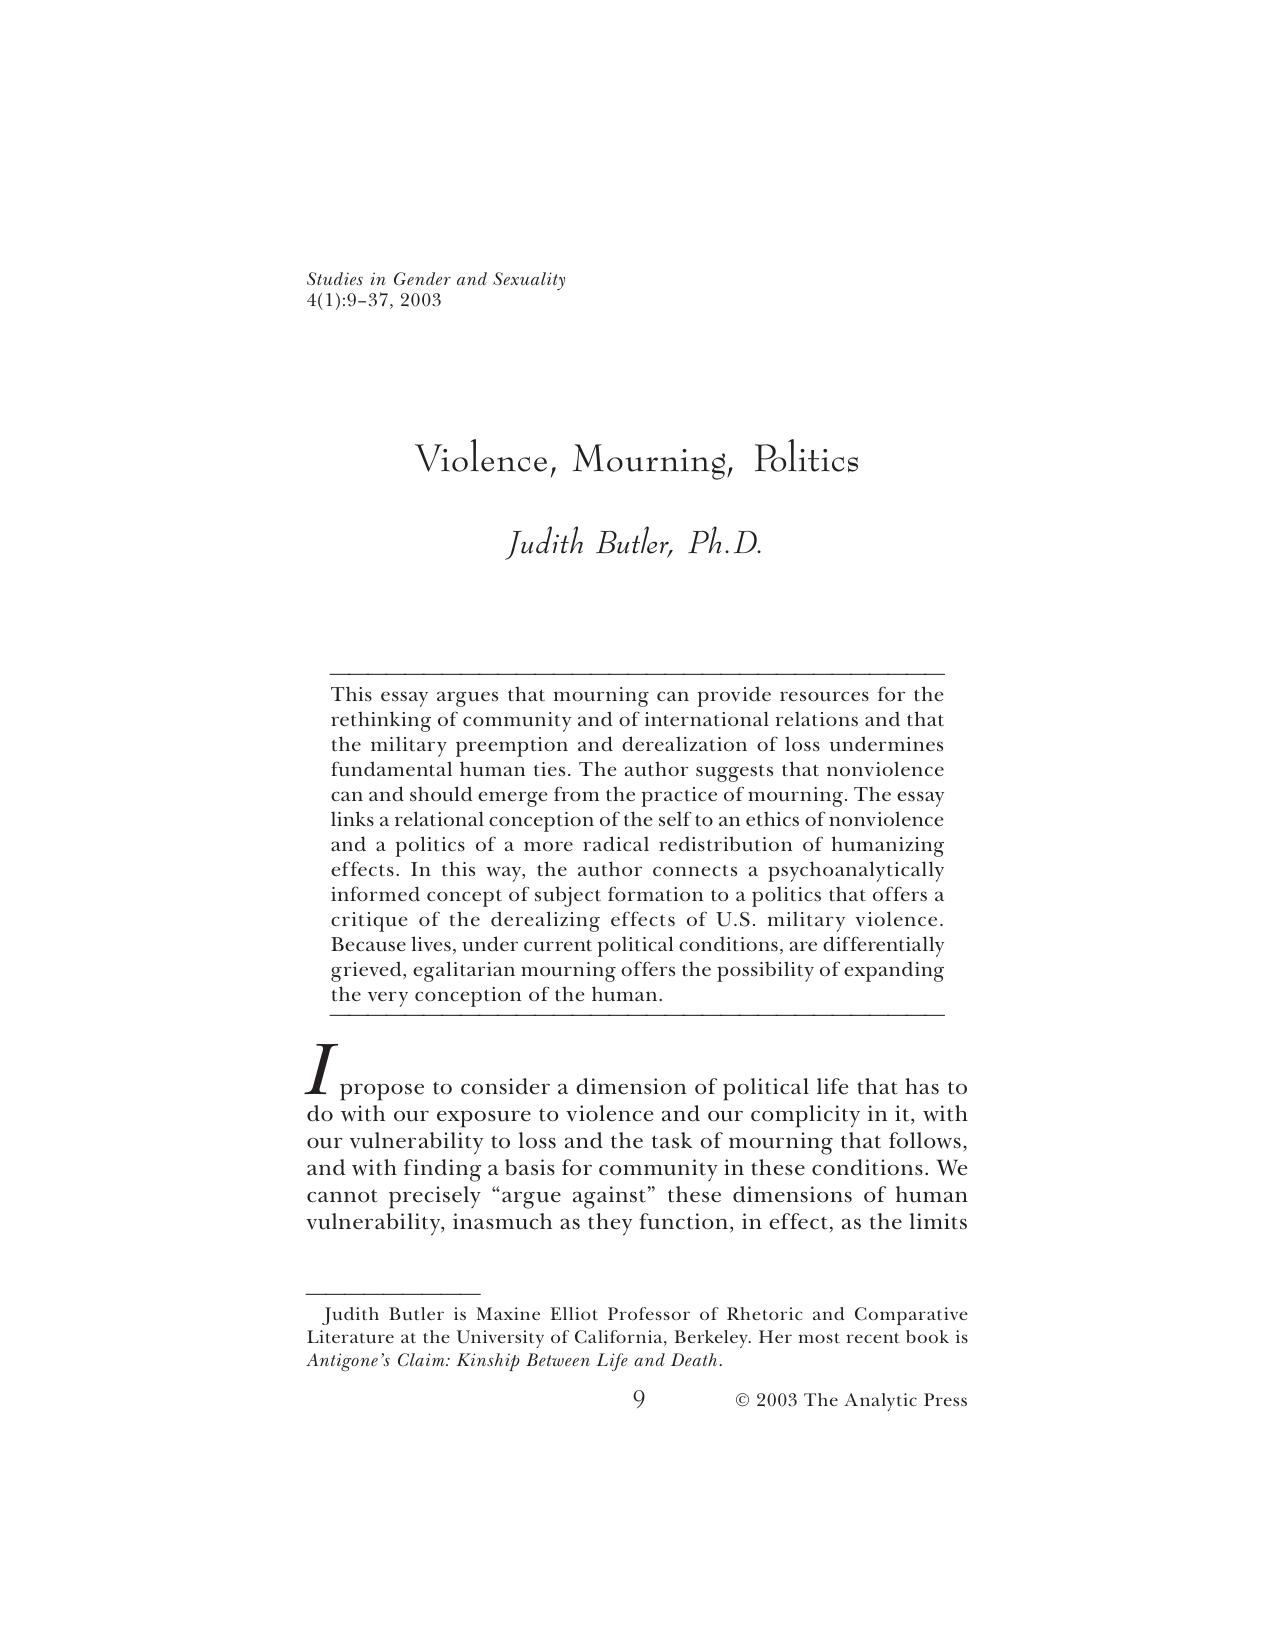 Violence, Mourning, Ethics - Studies in Gender and Sexuality [Essay]